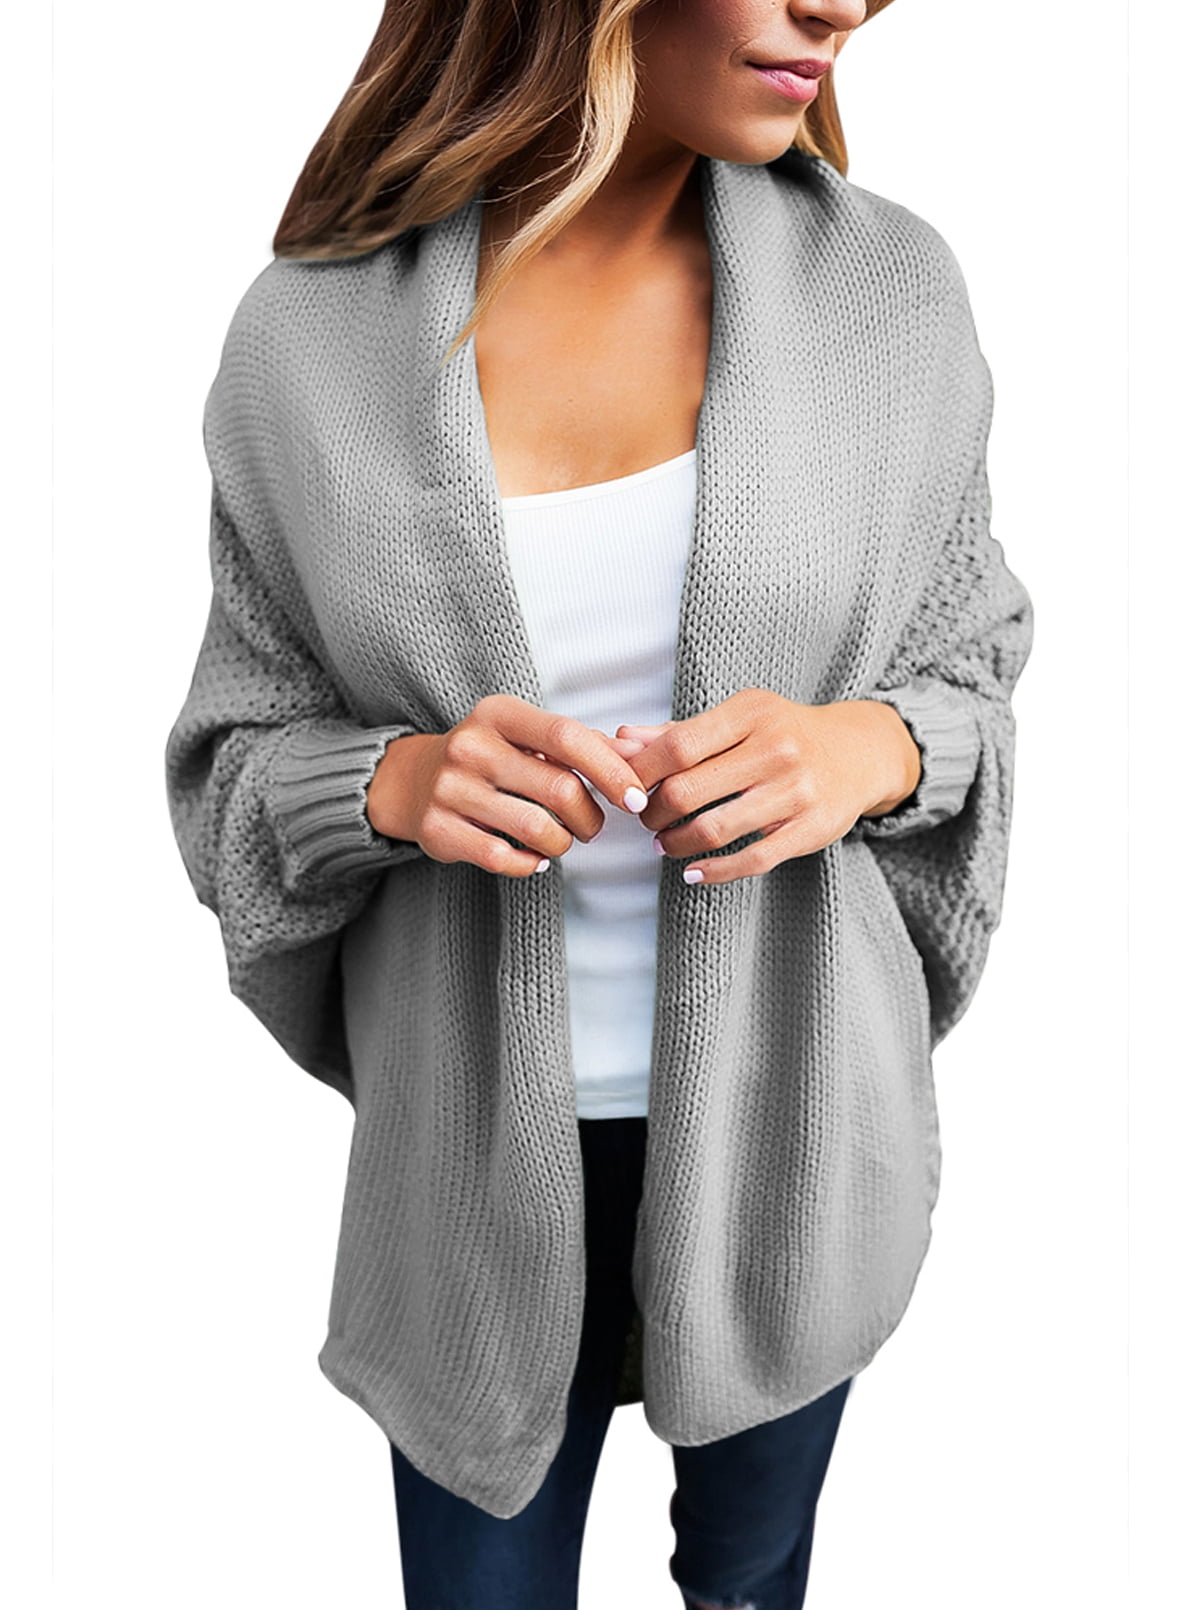 Ladies Women's Knitted Waterfall Cardigans Tops Sweaters Full Sleeves Plus Sizes